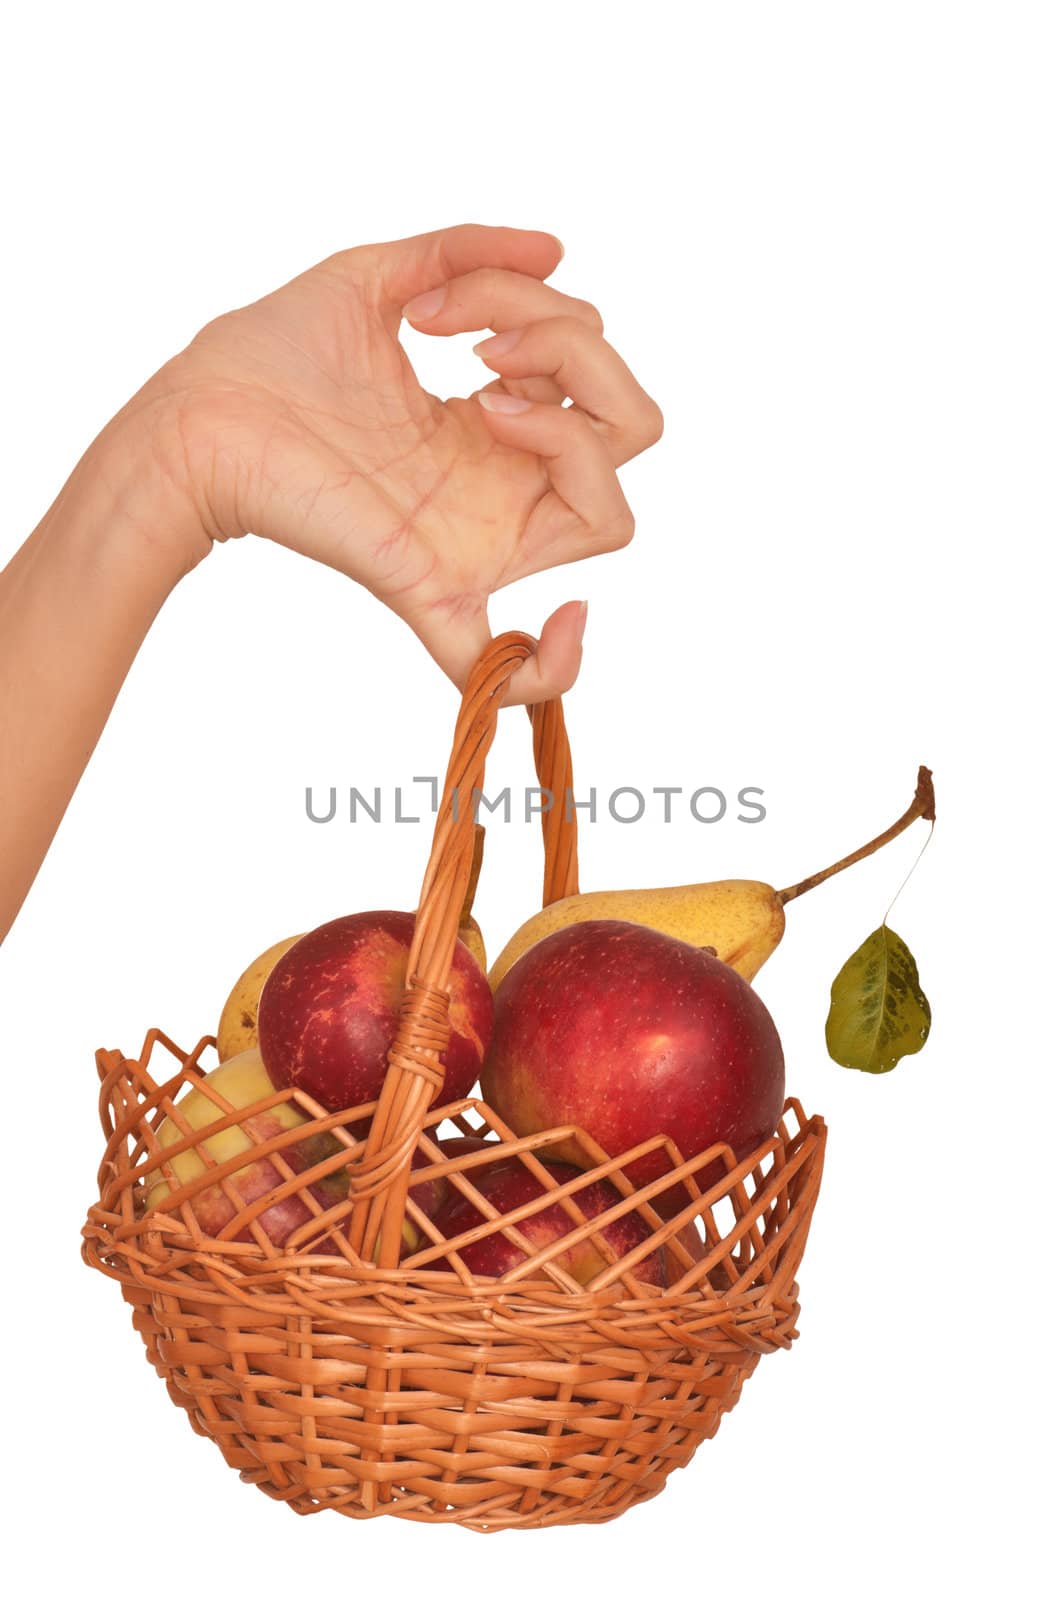 Basket with yellow pears and red apples from supermarket